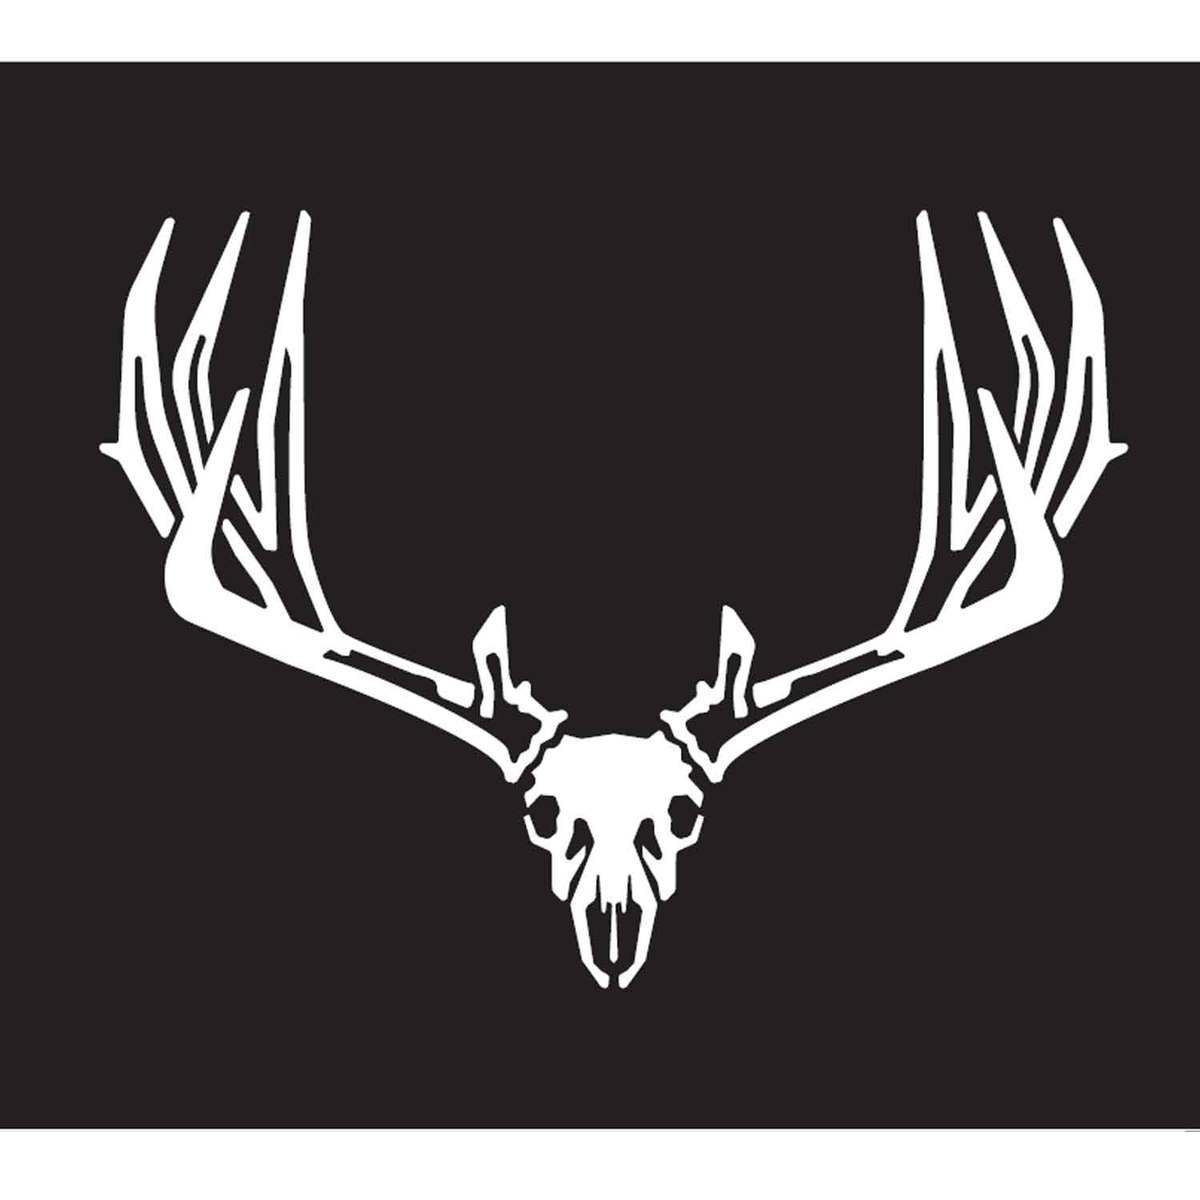 Huk Fishing Logo Decal- Outdoor Sticker- Hunting Decal- Vinyl Decal- Truck  Decal